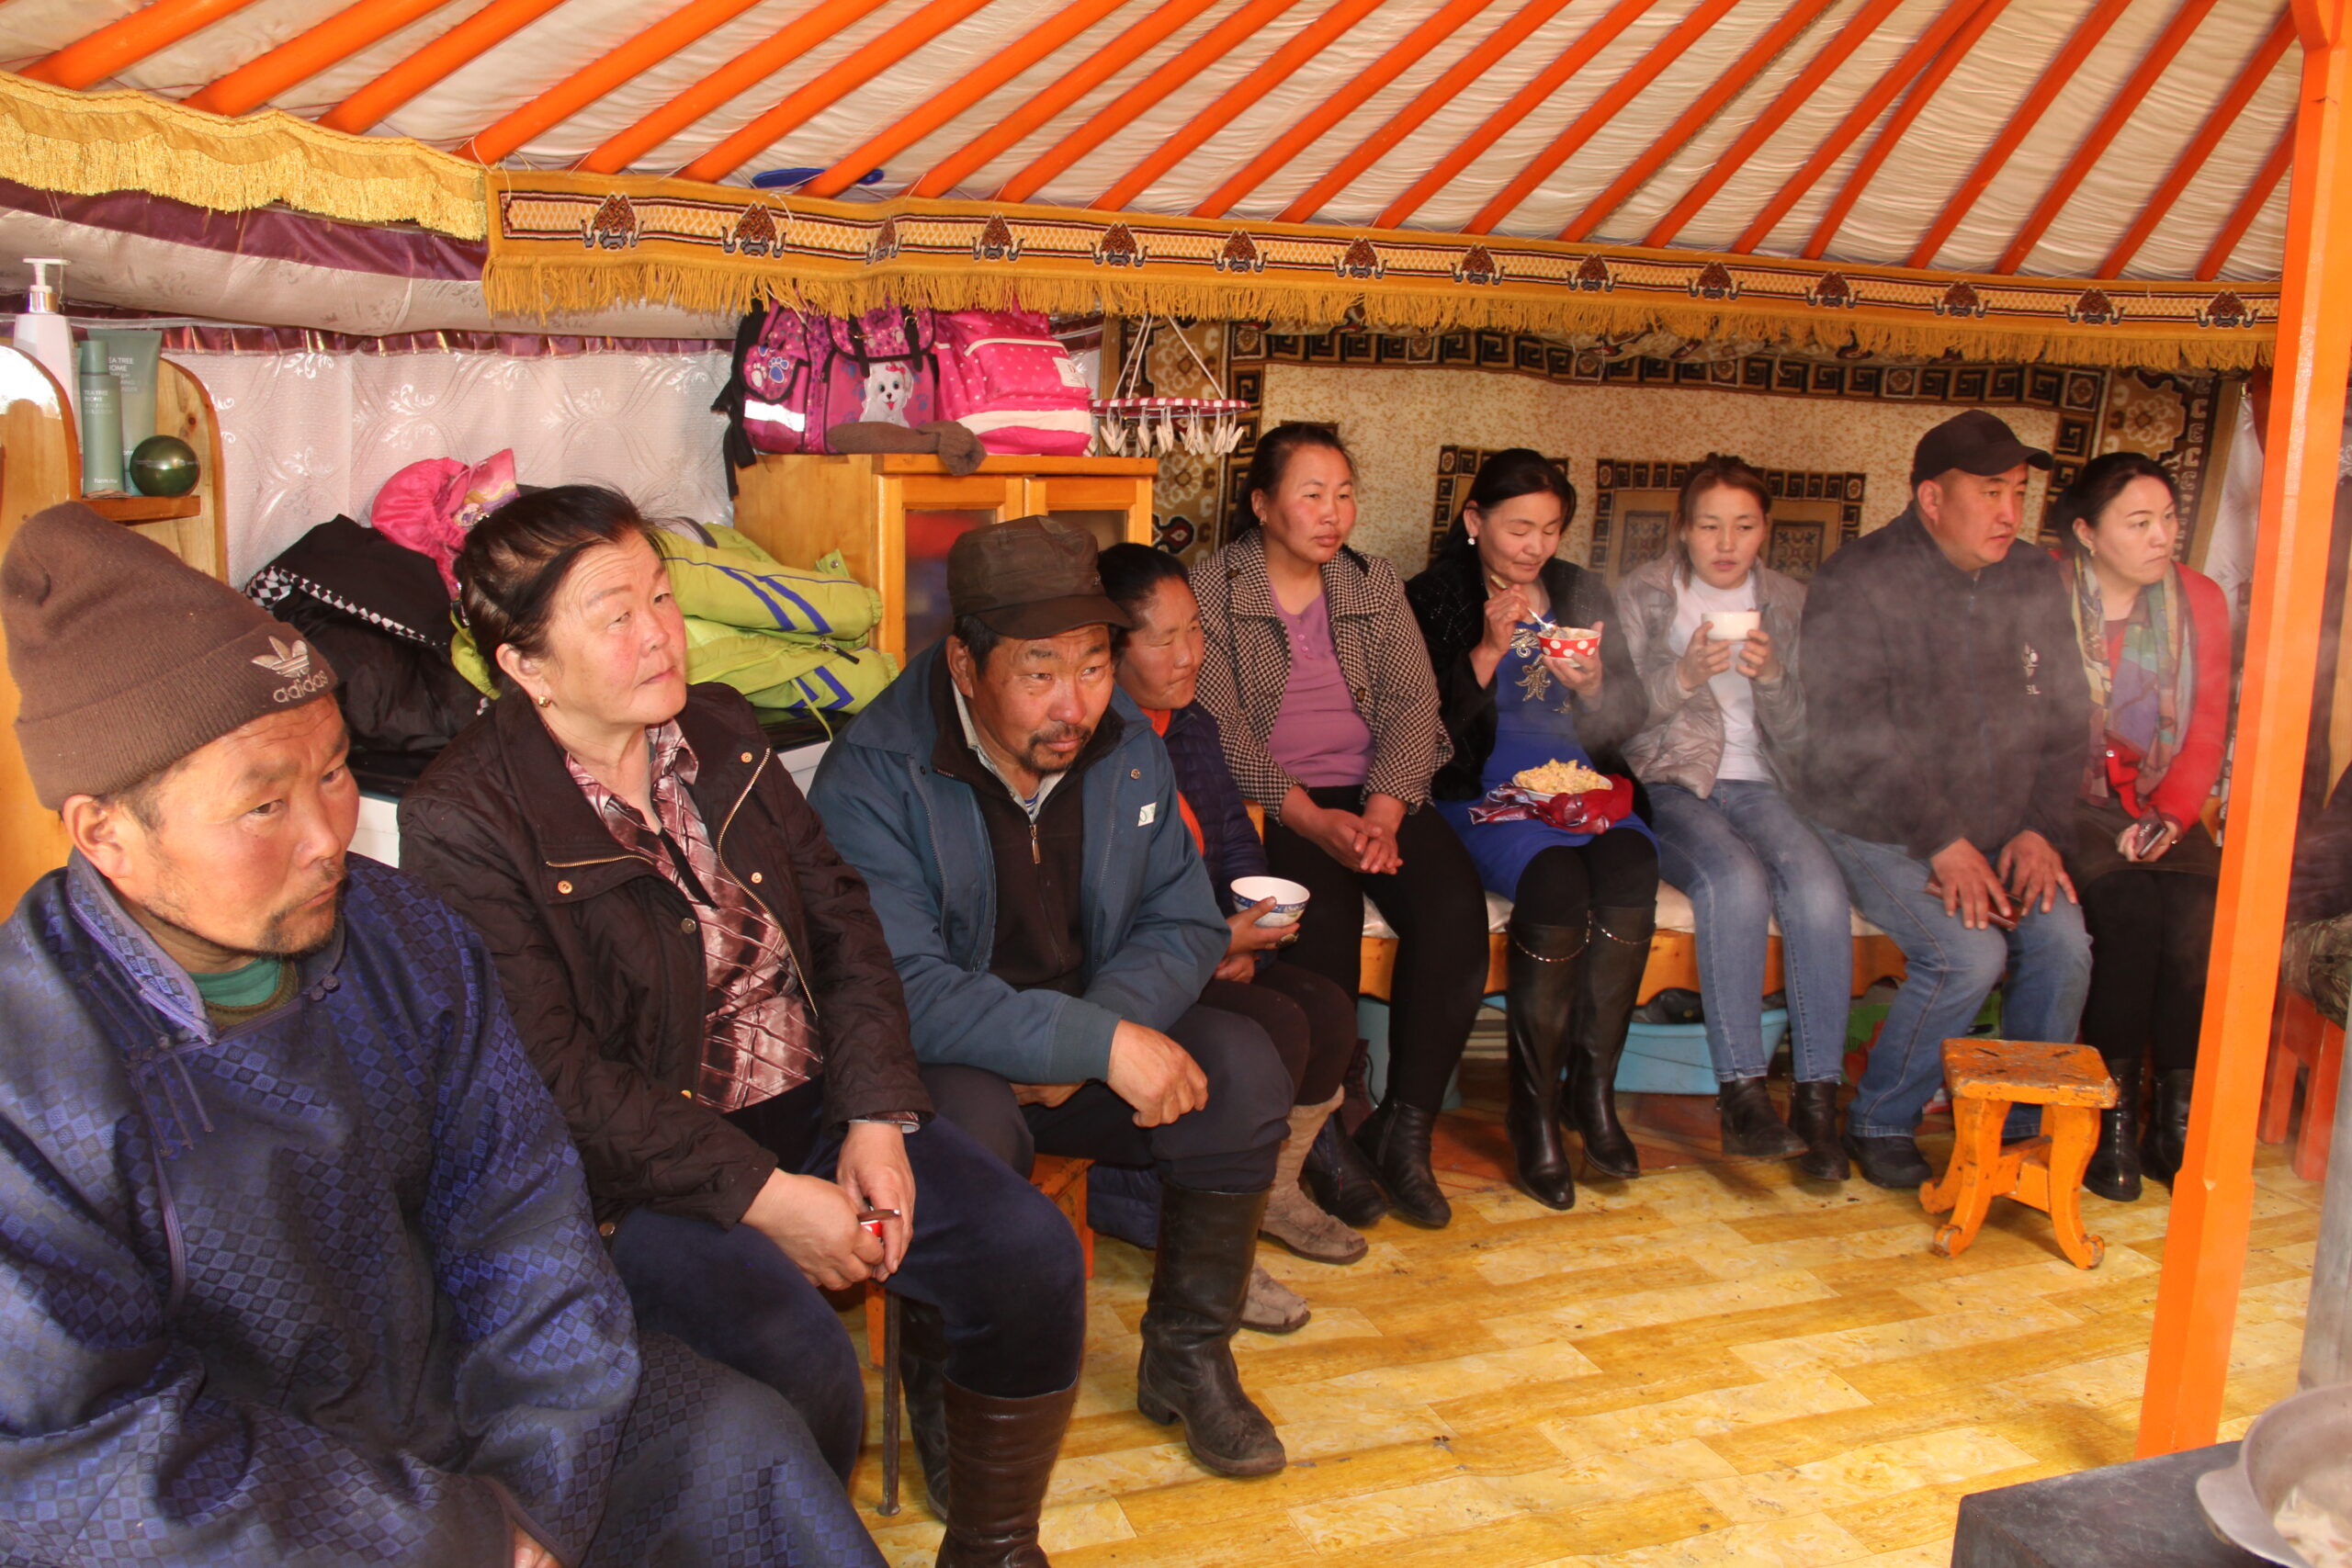 Several women and men sitting in a wooden round tent. They are holding tea cups and listening t a person that is not in the picture.